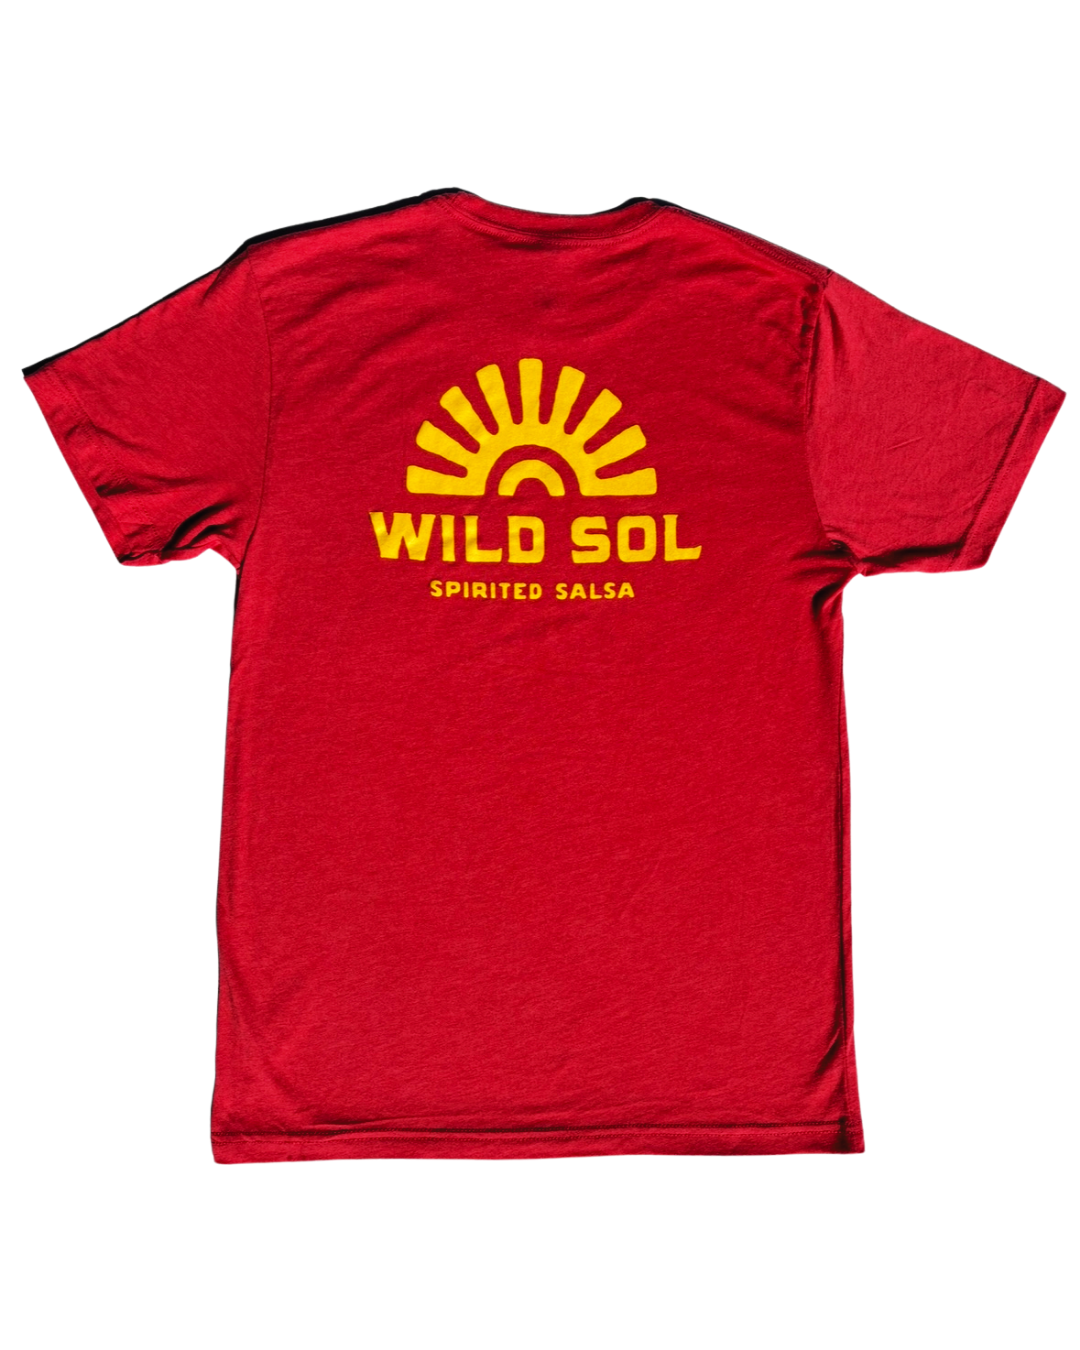 Celebrate with Sol Tee - Vintage Red